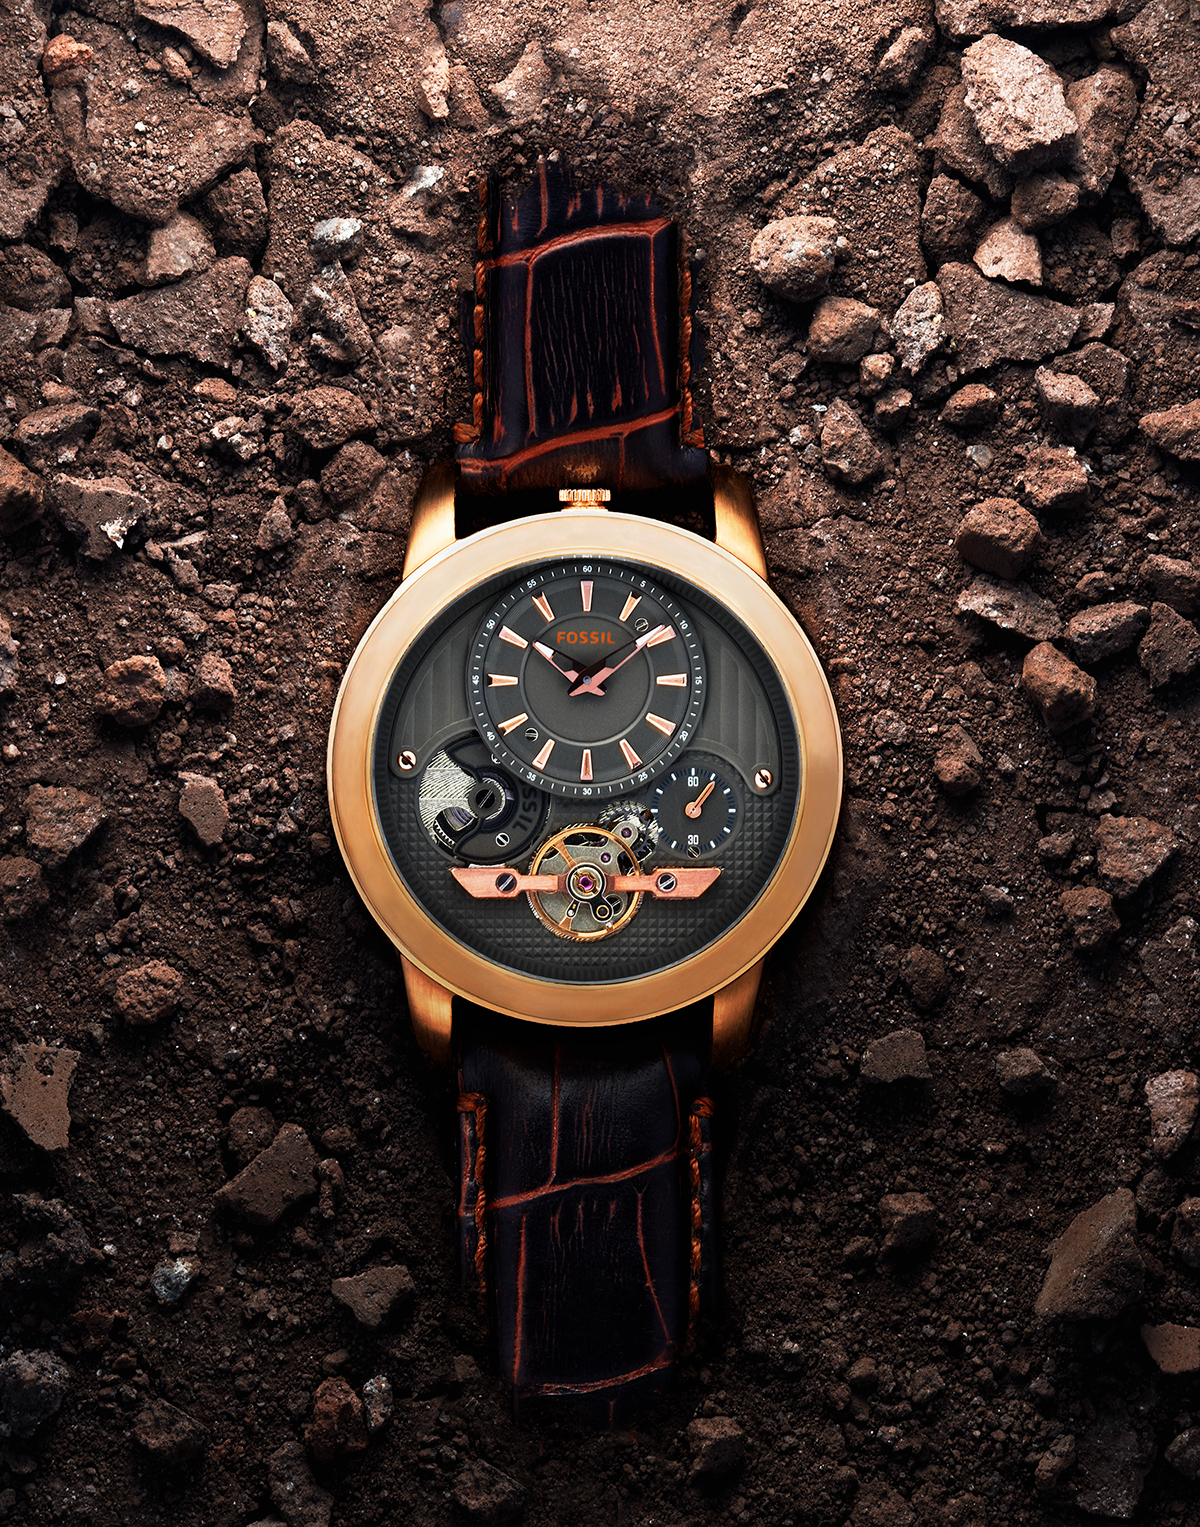 watch wrist watch product still life Product Photography watch photography